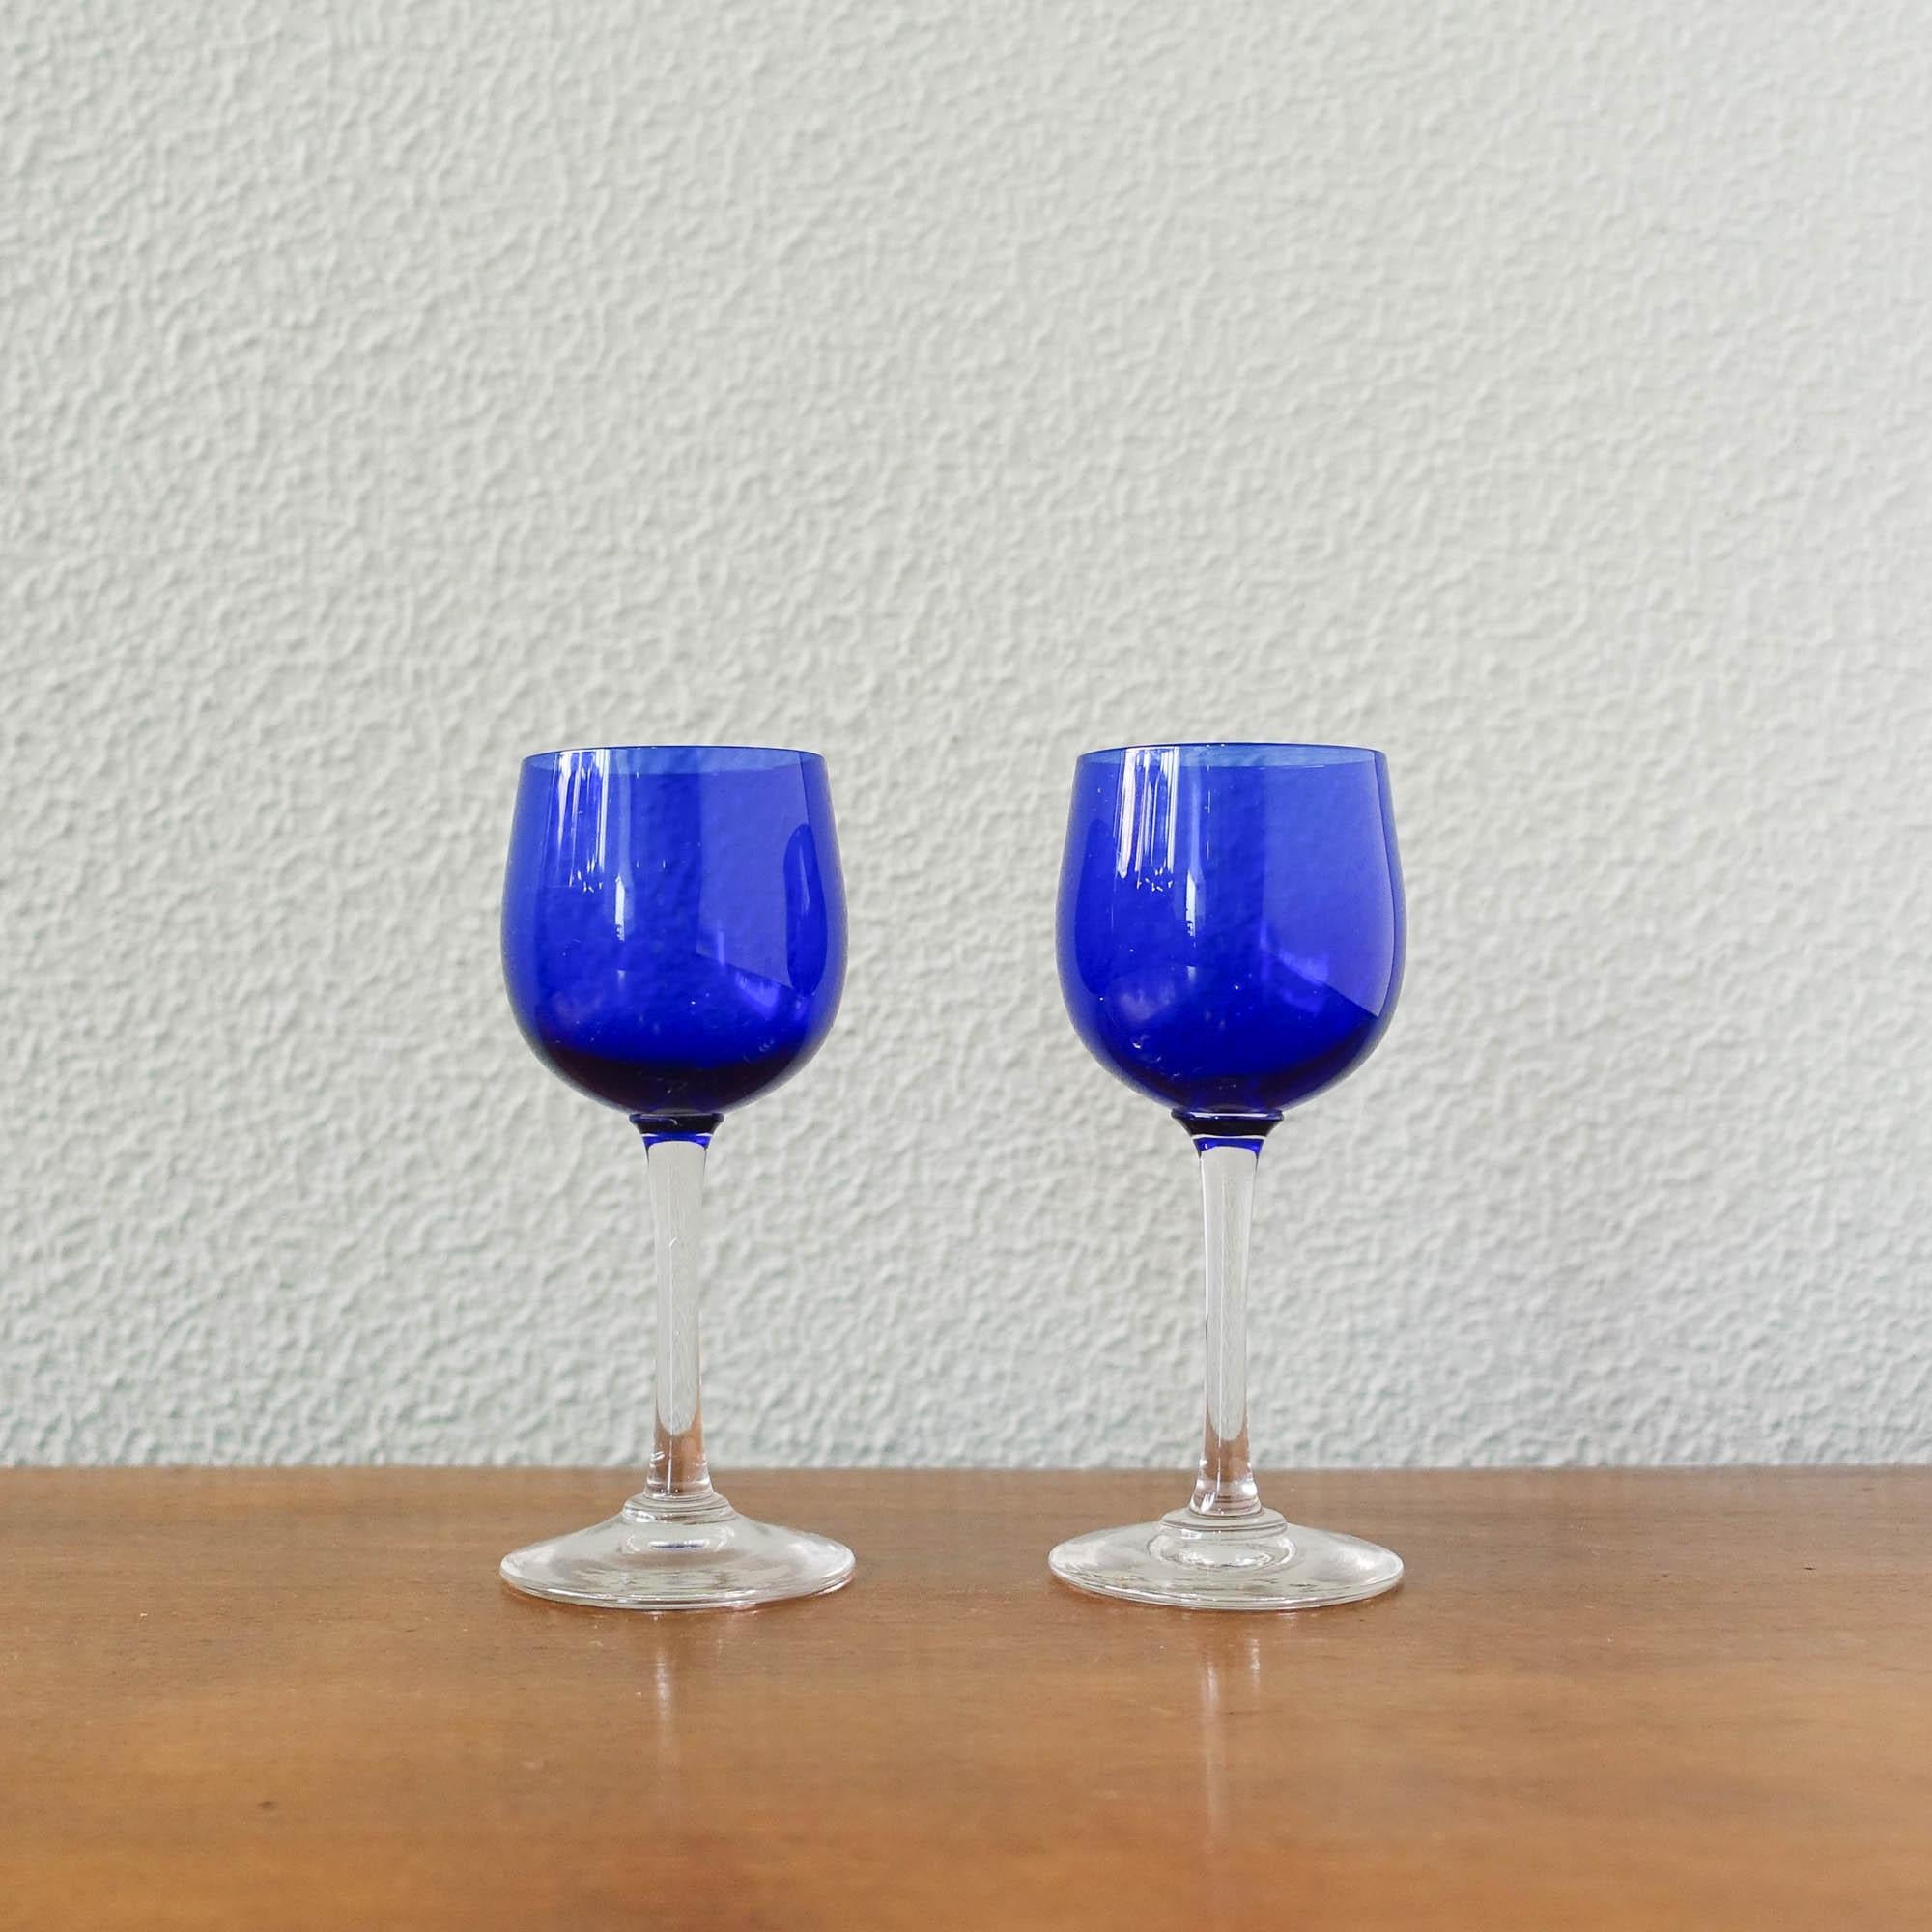 Mid-Century Modern Bottle and Two Glasses in Cobalt Blue by Marinha Grande, 1950's For Sale